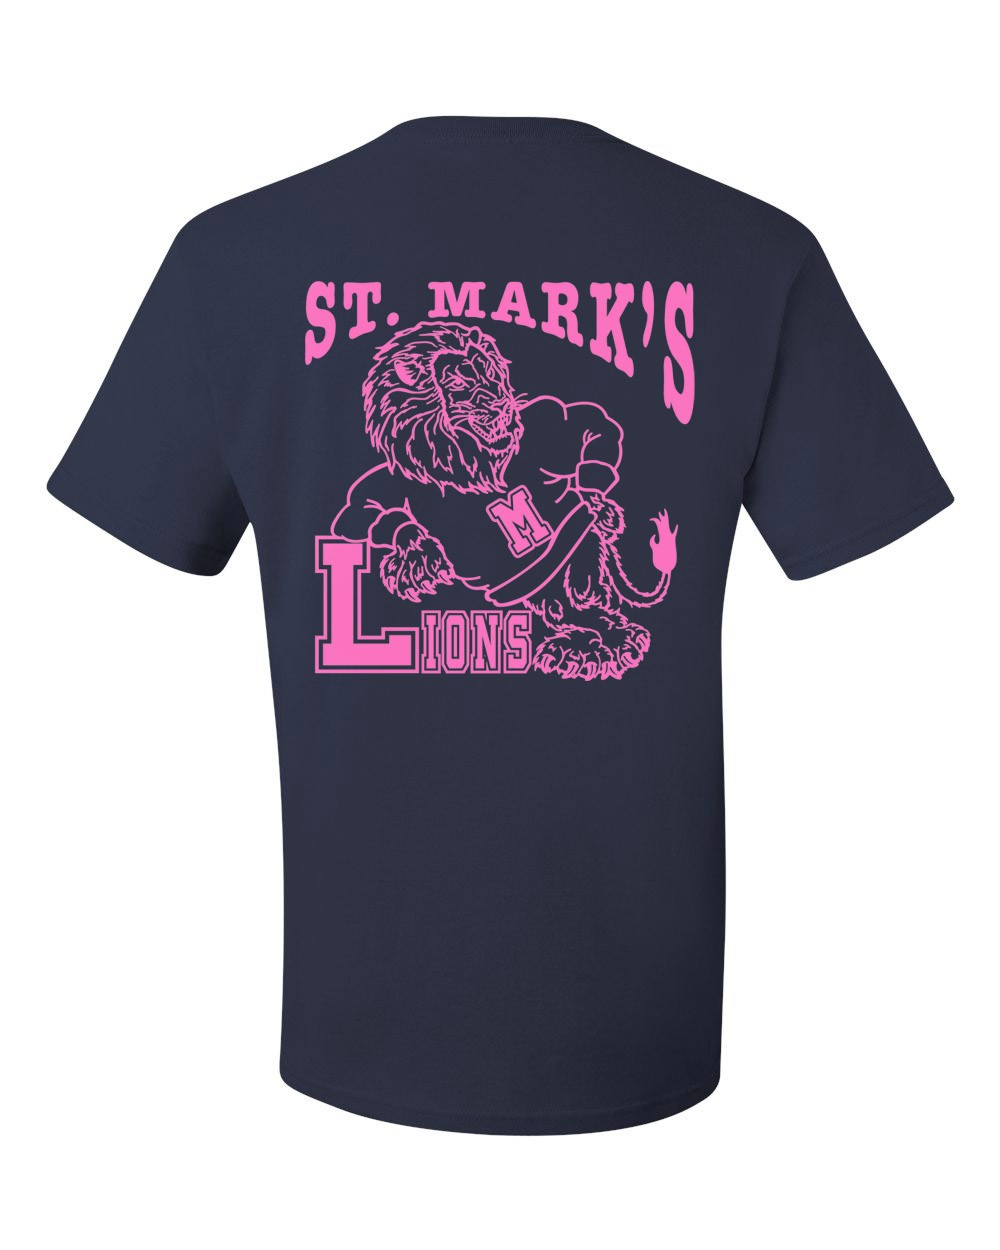 SMLS S/S Staff T-Shirt w/ SMLS Spirit Logo - Please Allow 2-3 Weeks for Delivery